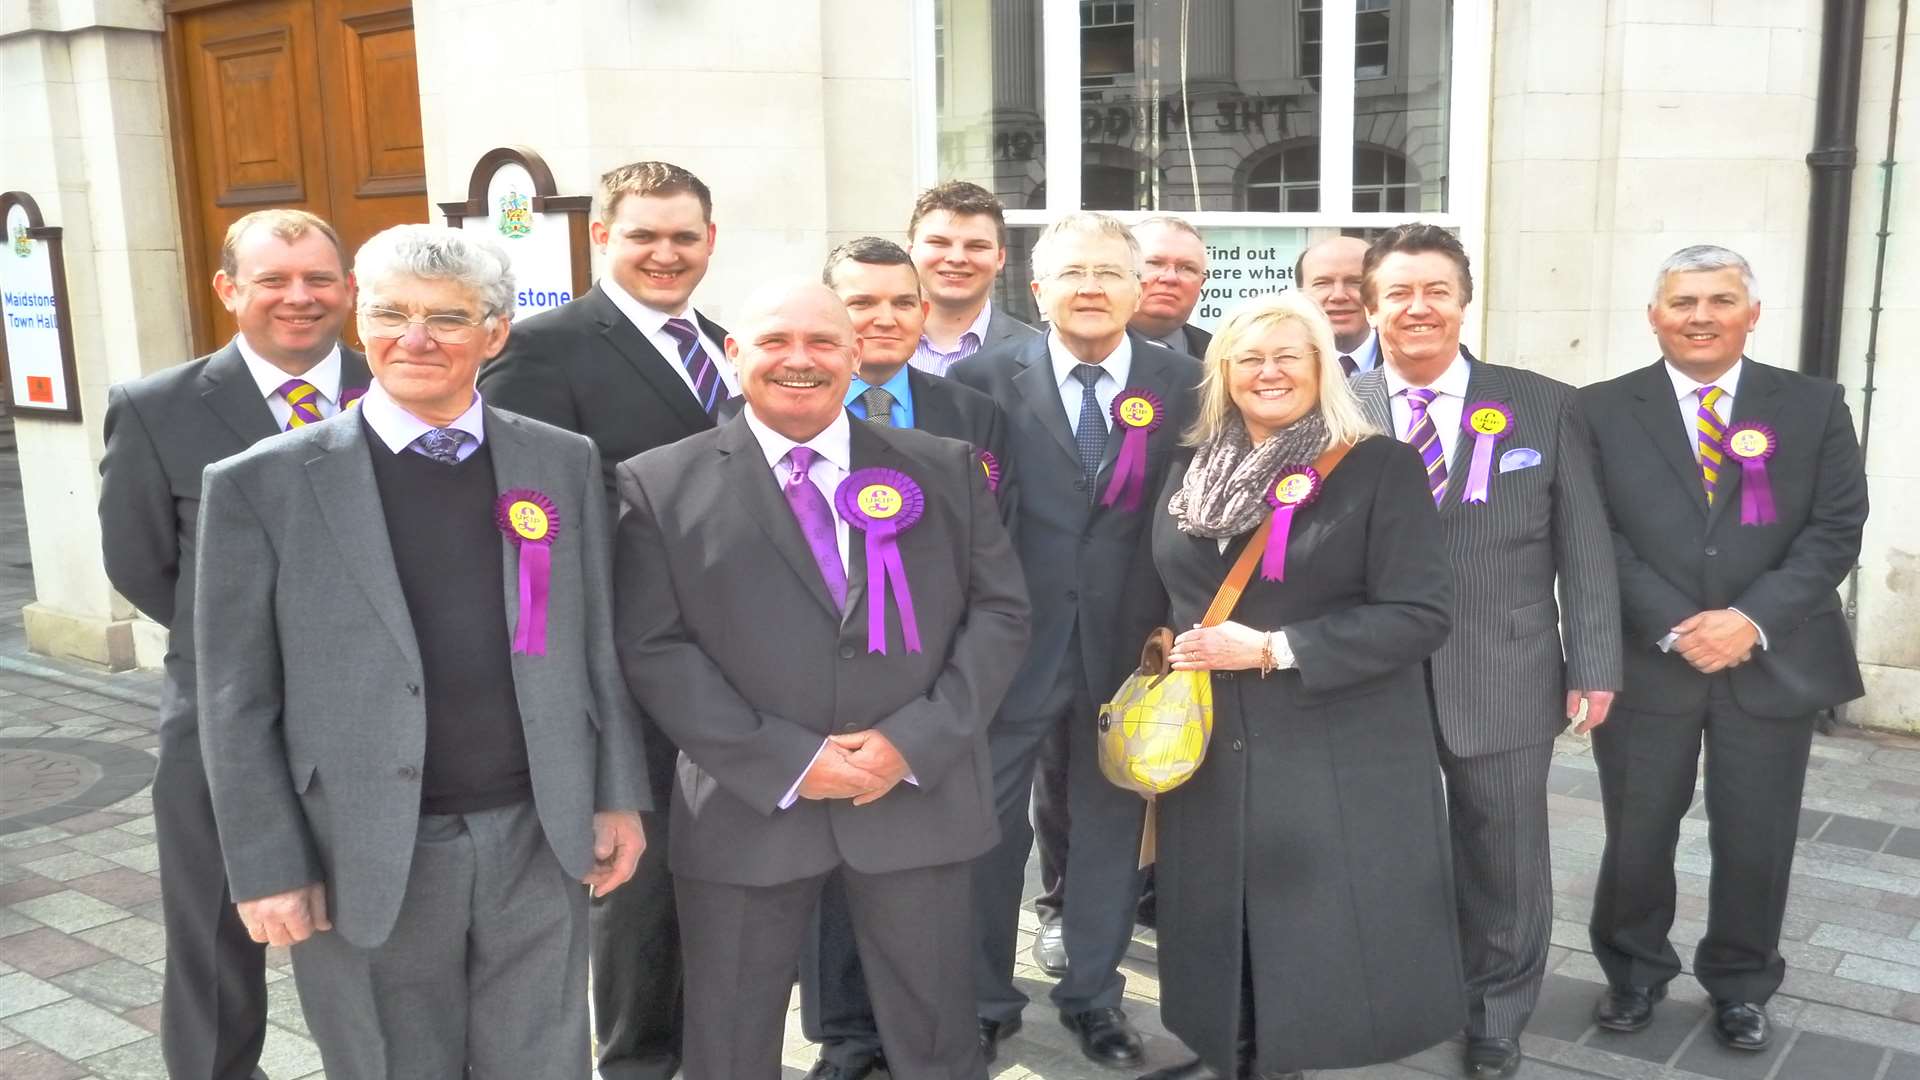 The UKIP candidates gather outside the Town Hall